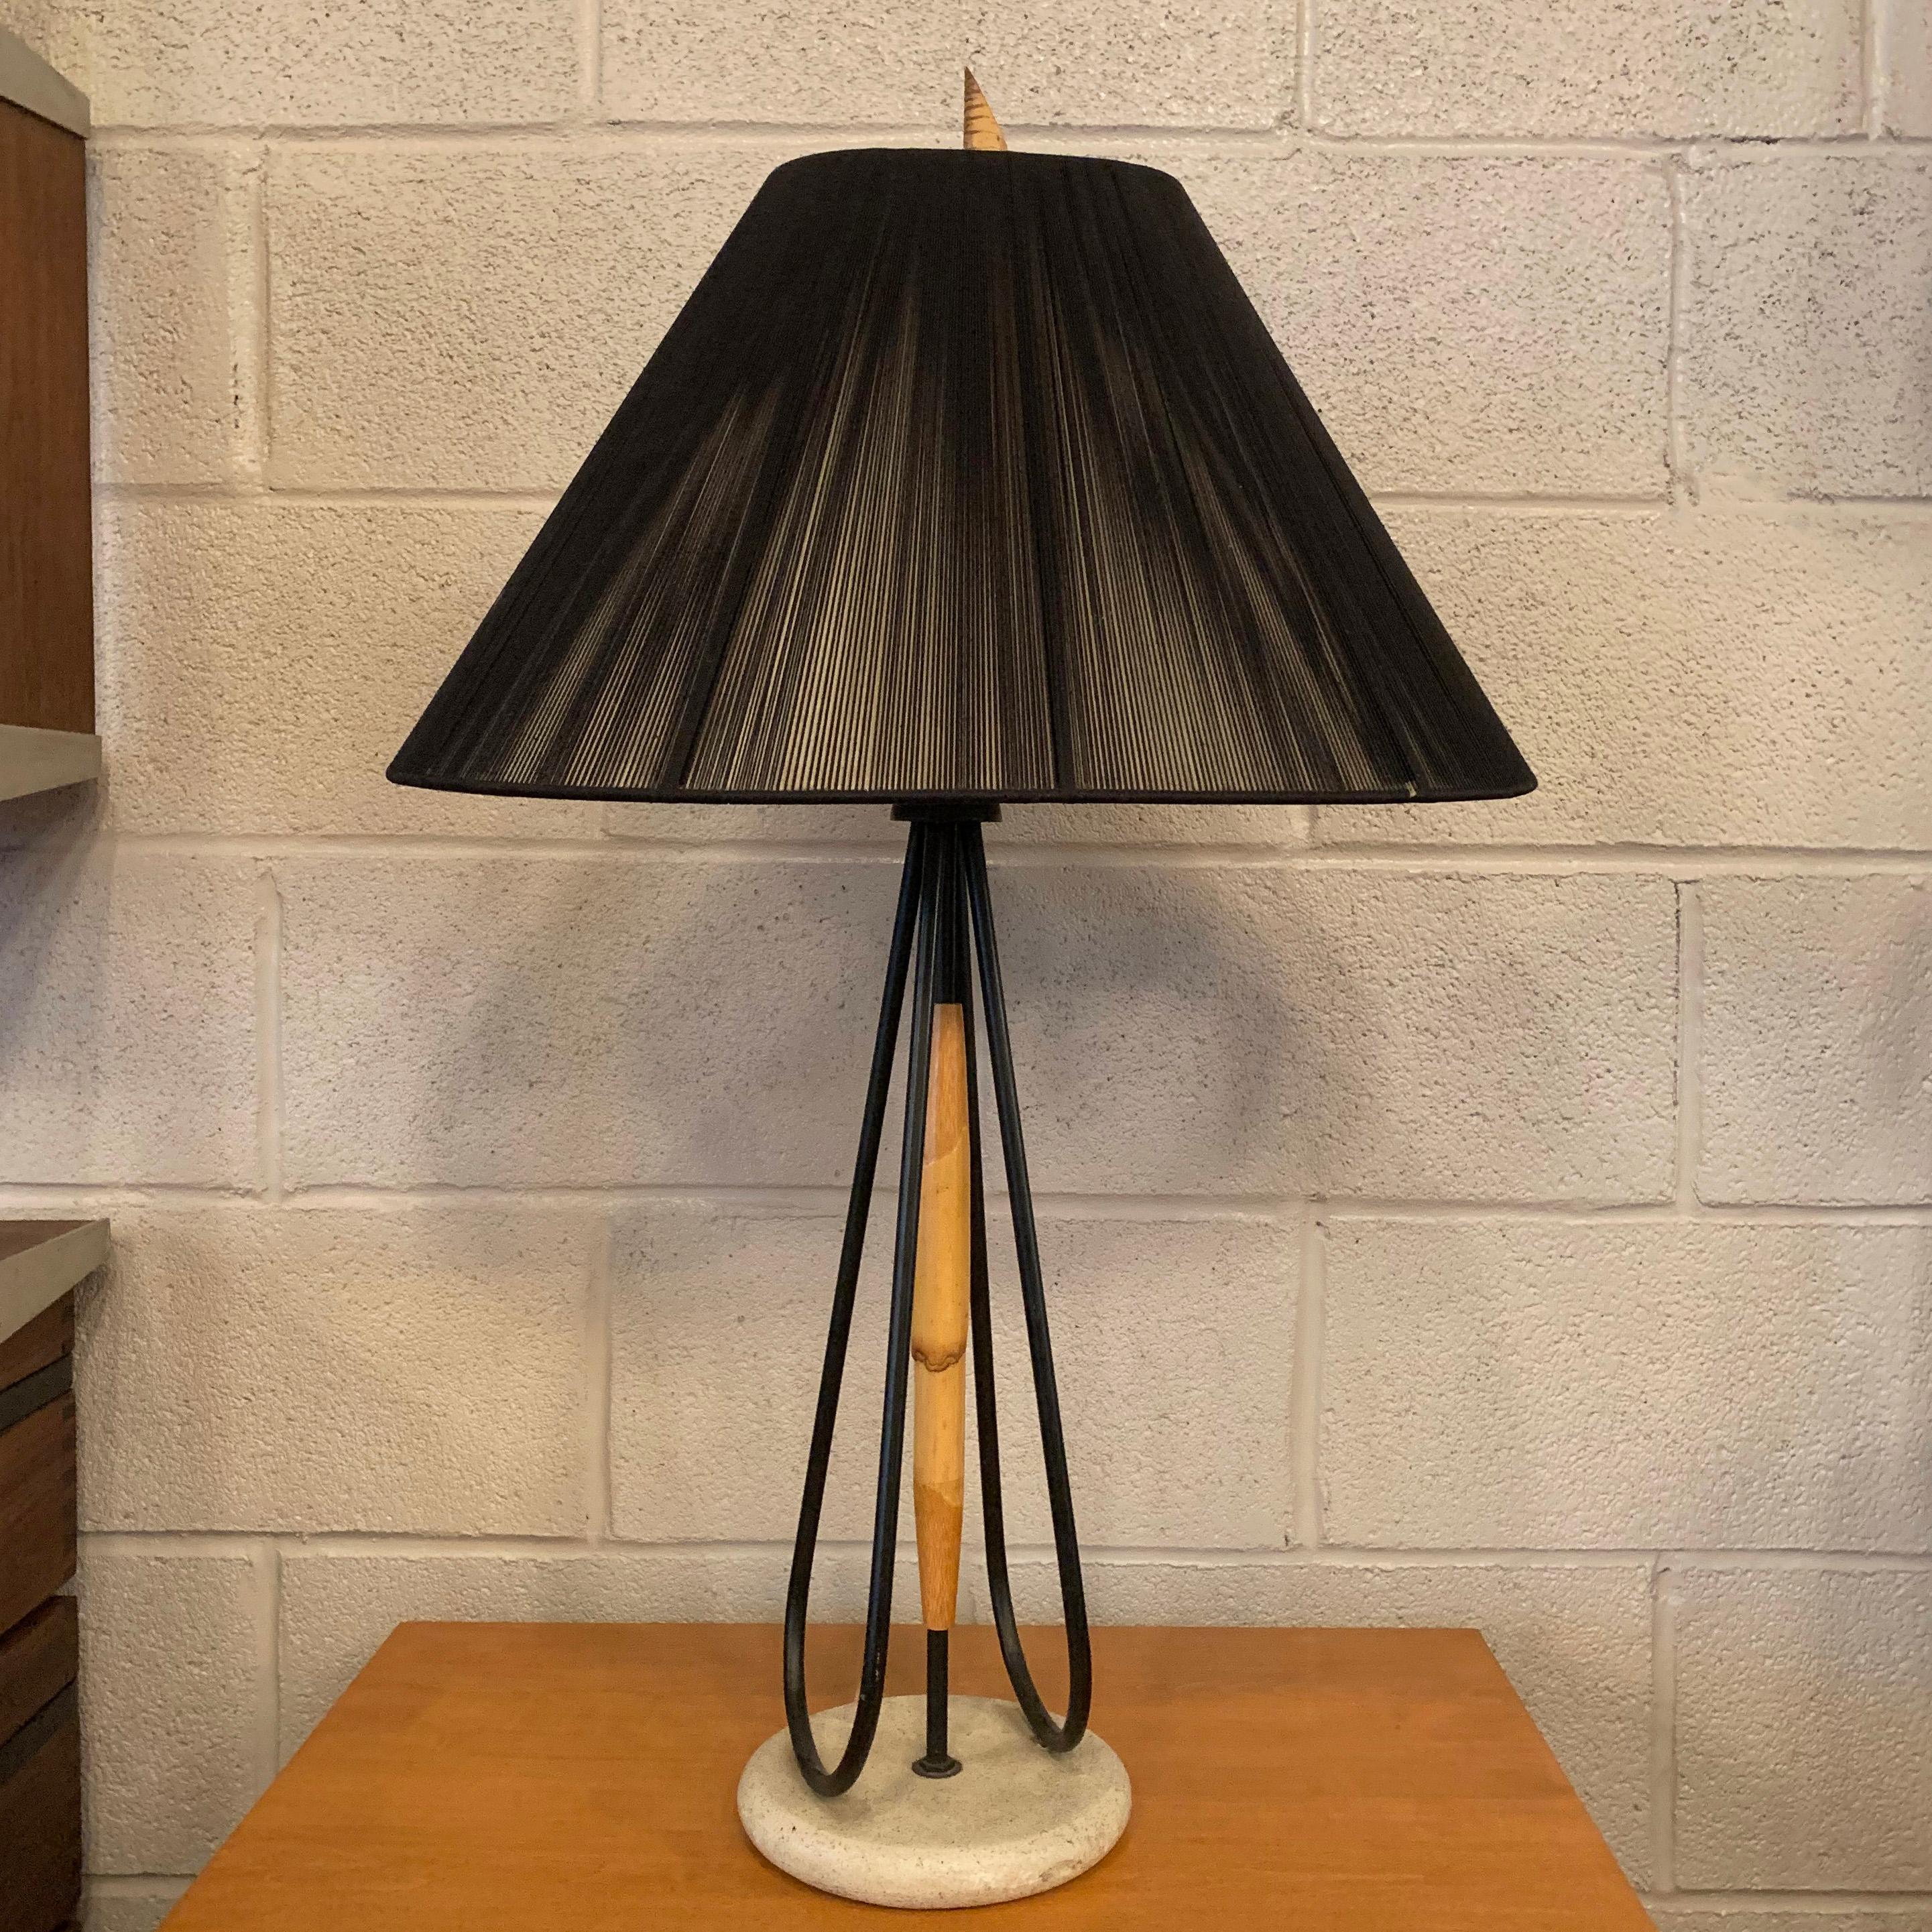 Mid-Century Modern table lamp features a delicate wrought iron and bamboo stem on a painted wood base with black silk string shade by Hilo Steiner and matching bamboo finial.